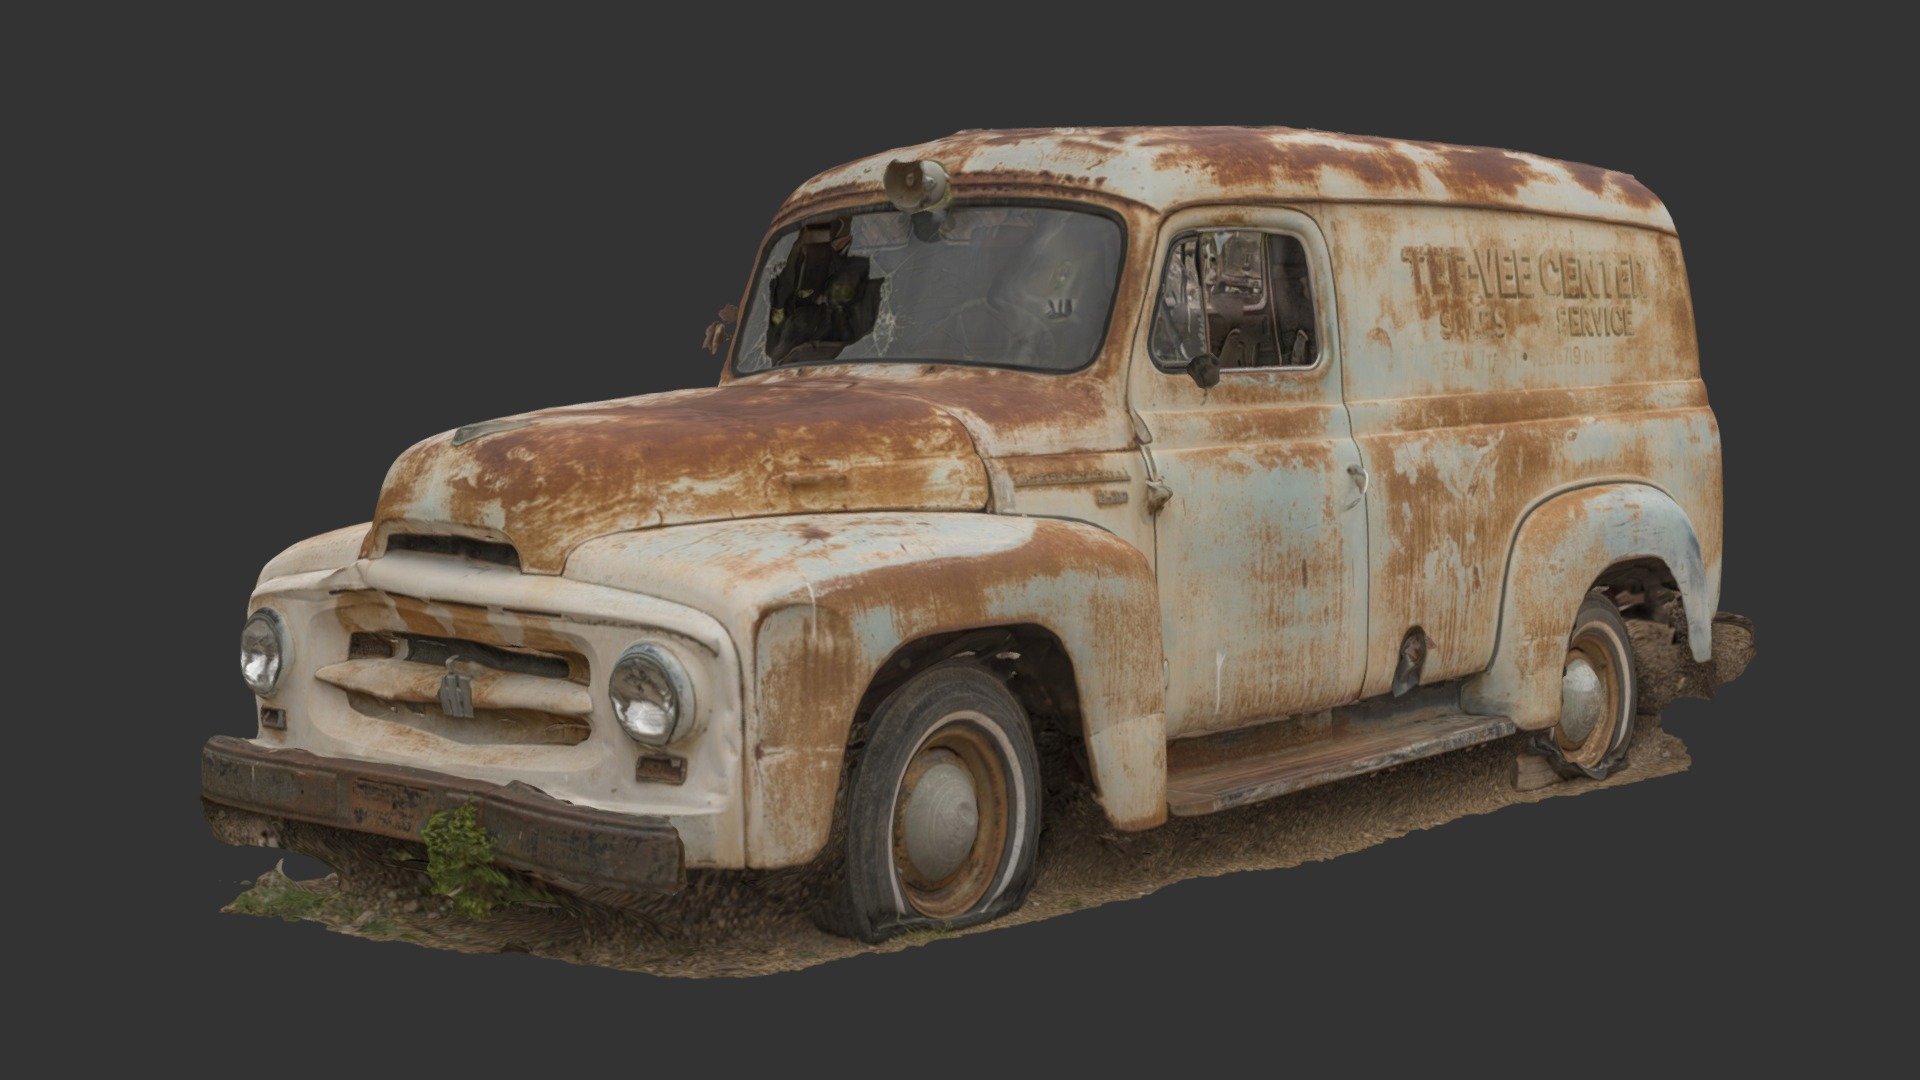 A scan of a derelict van that I made from video footage I captured on a trip out west a few years back, the rear corner is messed up.

Processed with Agisoft Photoscan 3d model